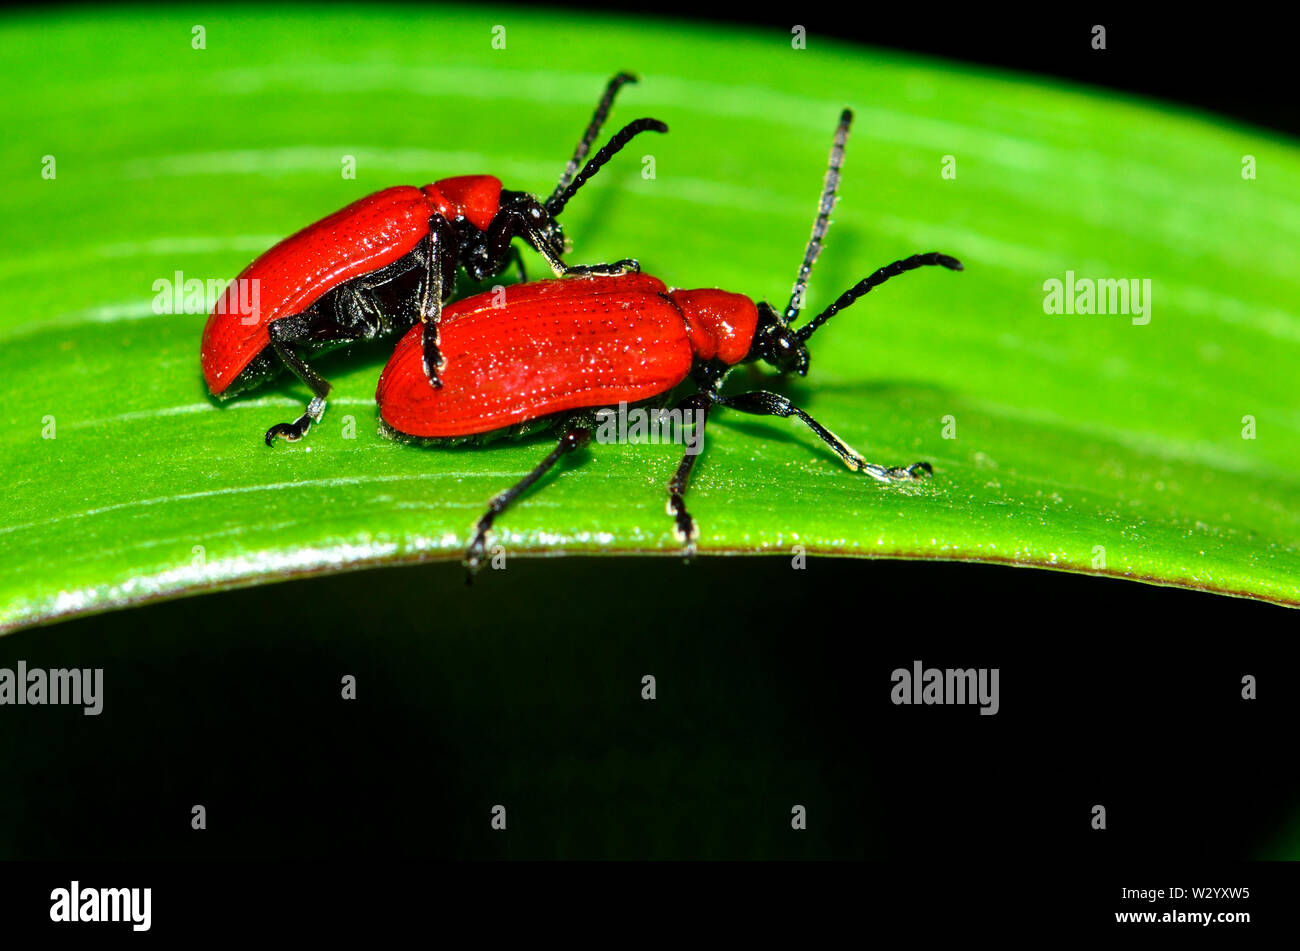 Lily Beetle (Lilioceris lilii) / Red Lily Beetle / Scarlet Lily Beetle / Lily Leaf Beetle. Kent garden, UK. May Stock Photo